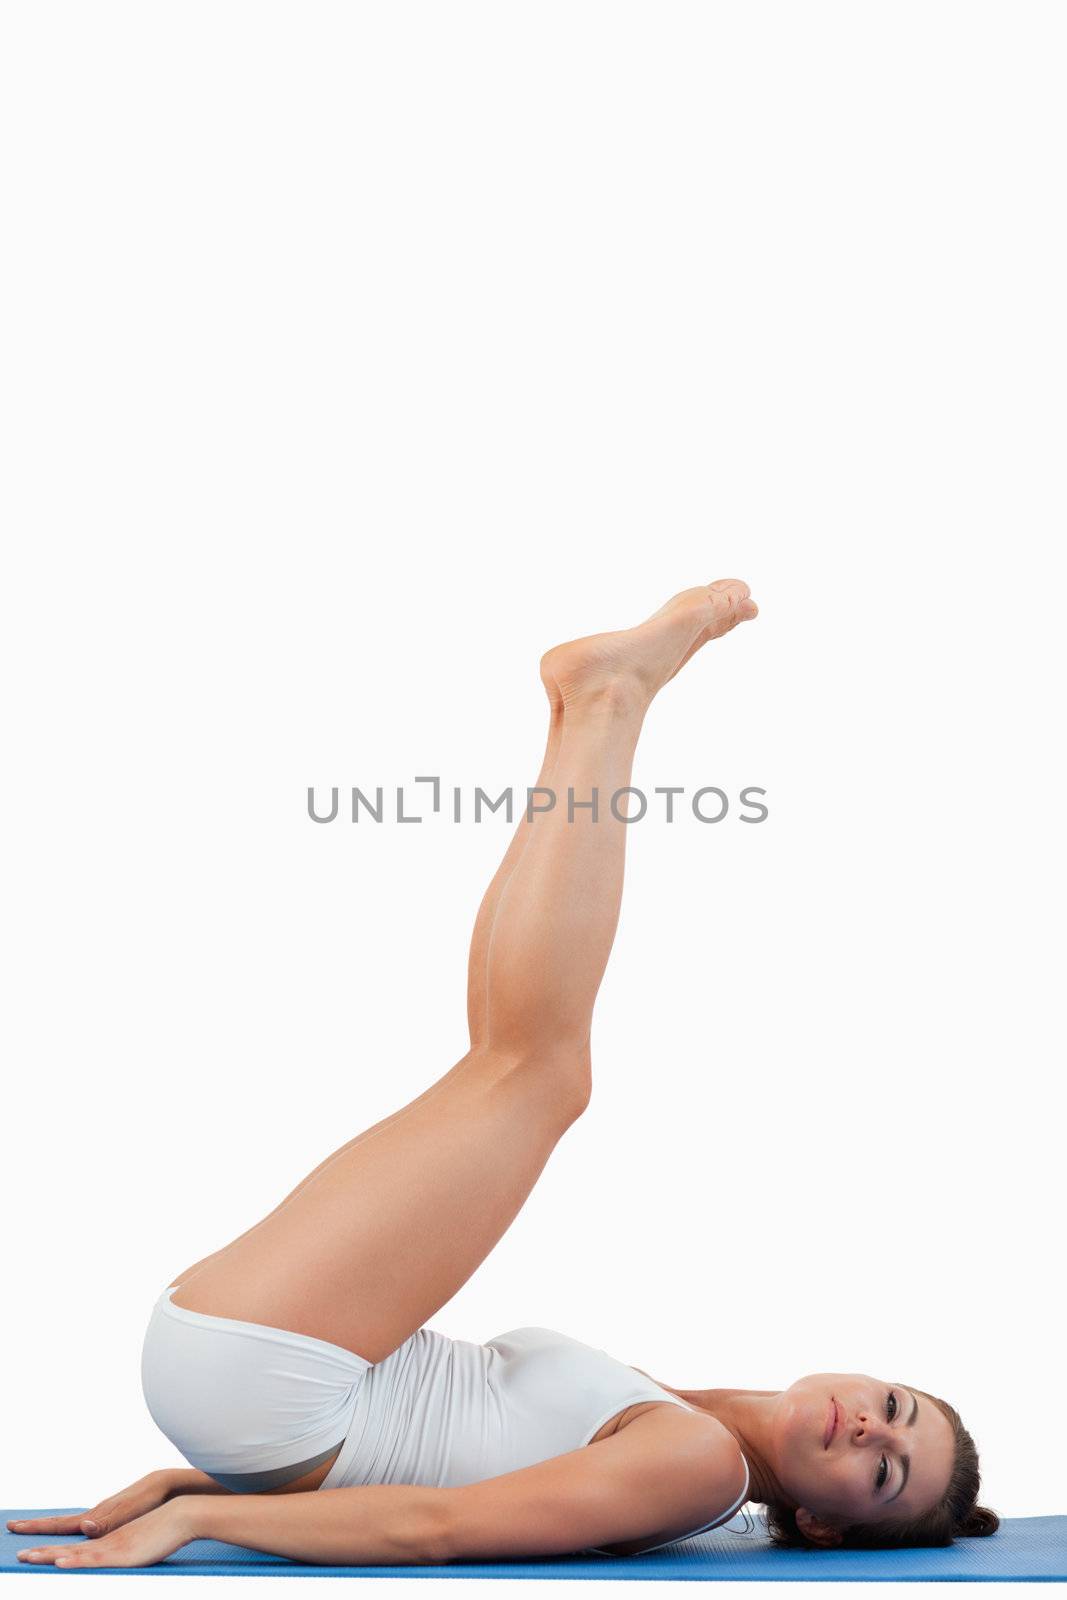 Portrait of a young woman exercising against a white background